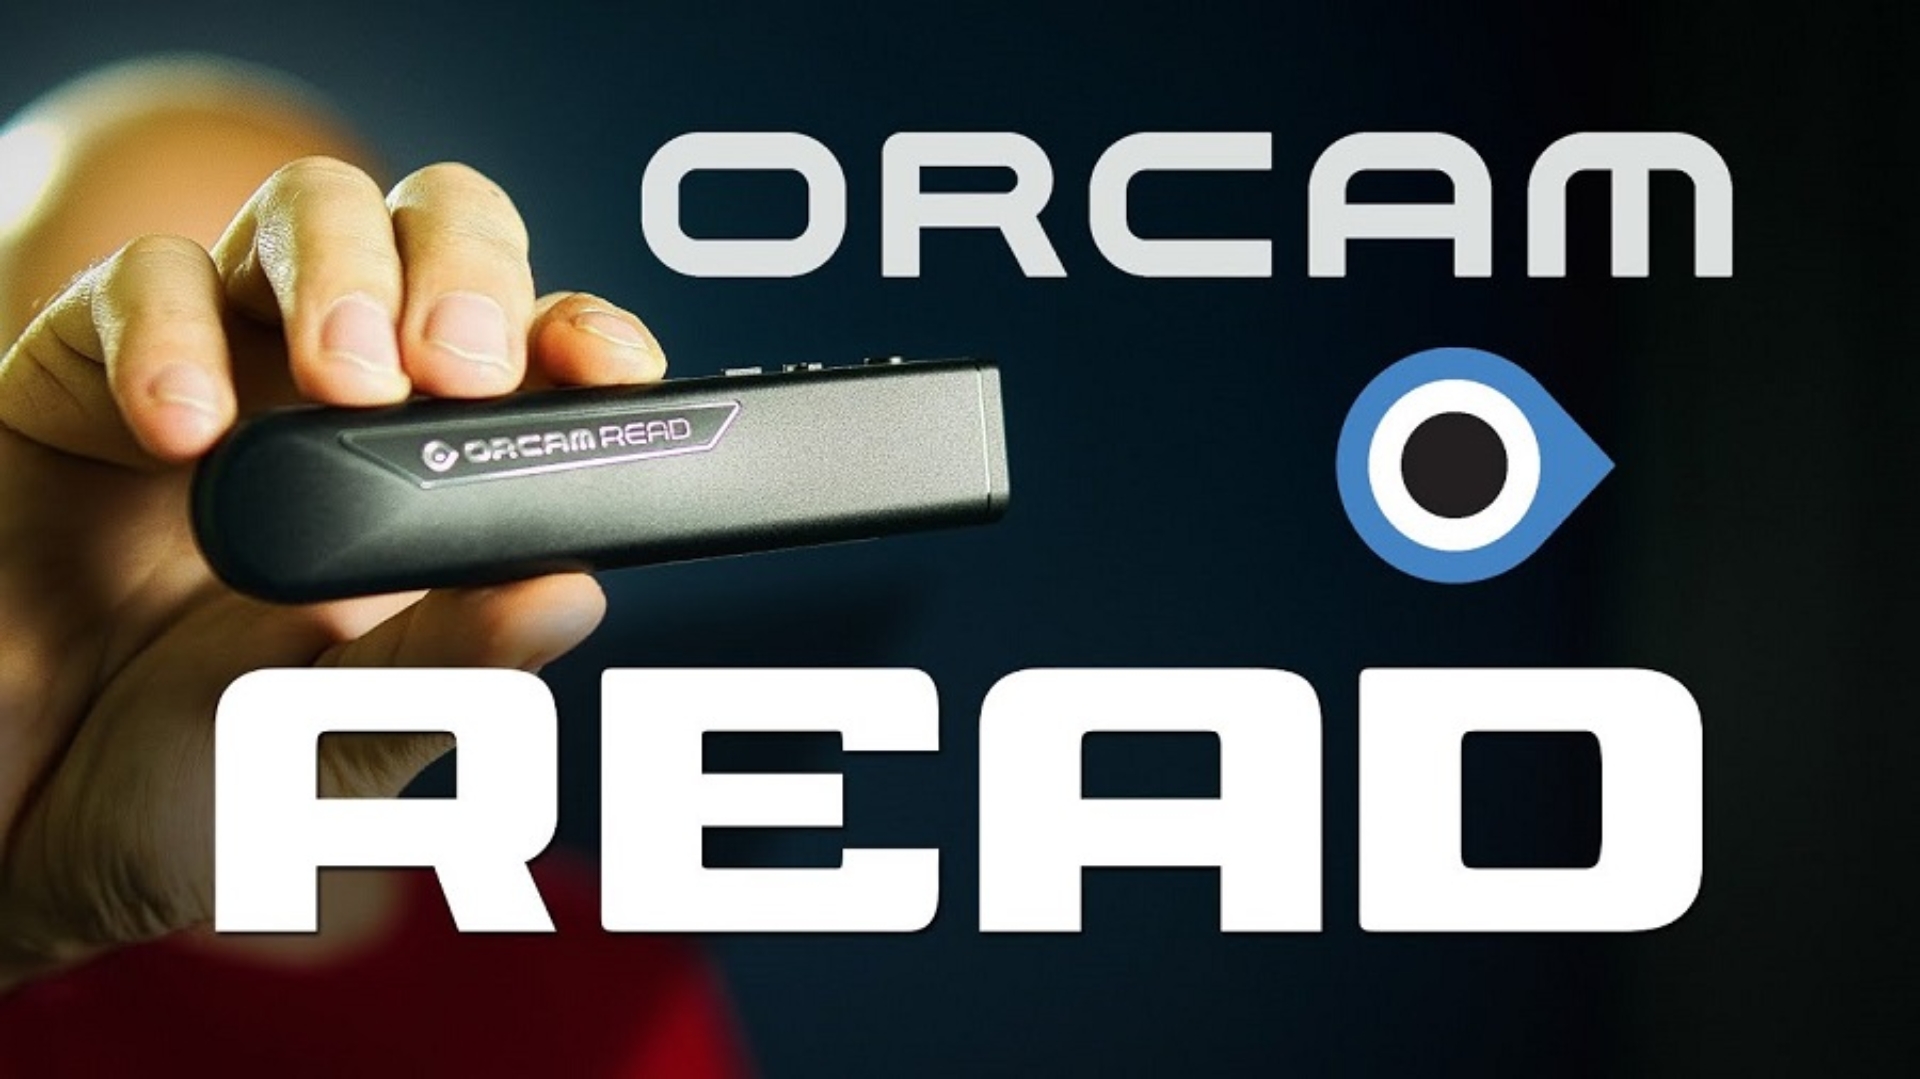 The OrCam READ